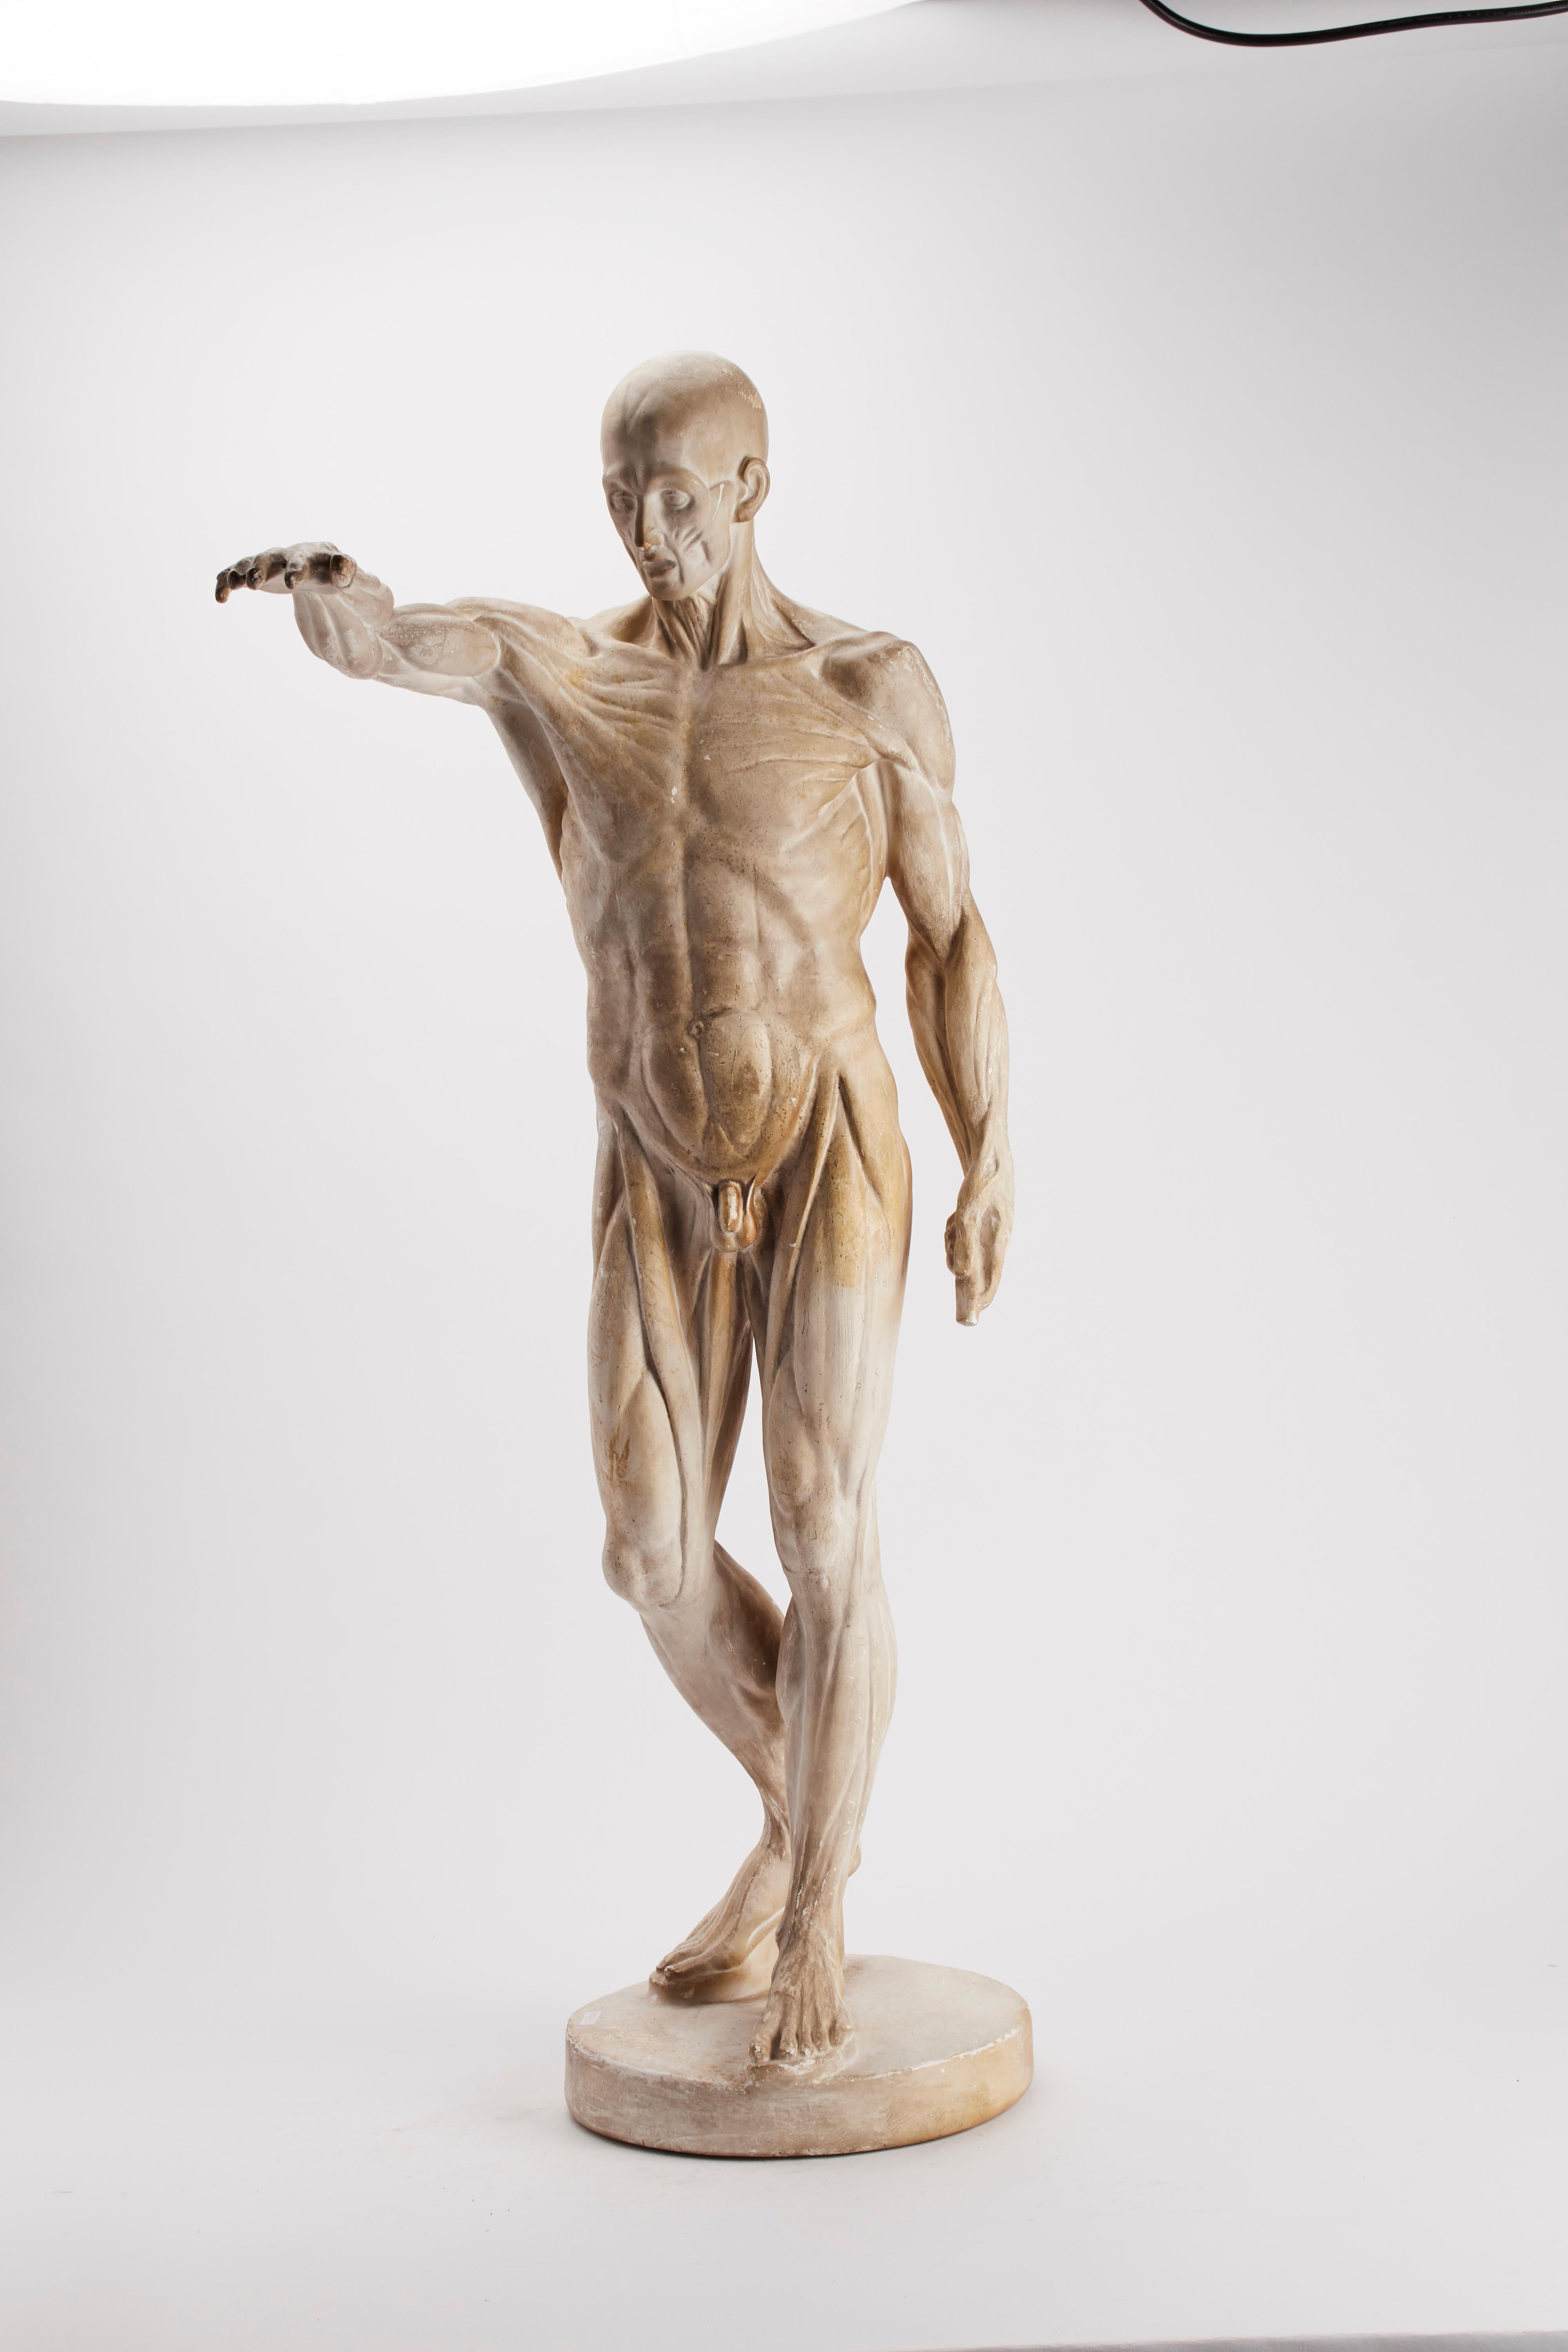 The anatomical sculpture, cast out of plaster, depicts a flayed man standing over a round base in a classical pose with the lifted arm. Anatomical study purpose, Italy, circa 1880.